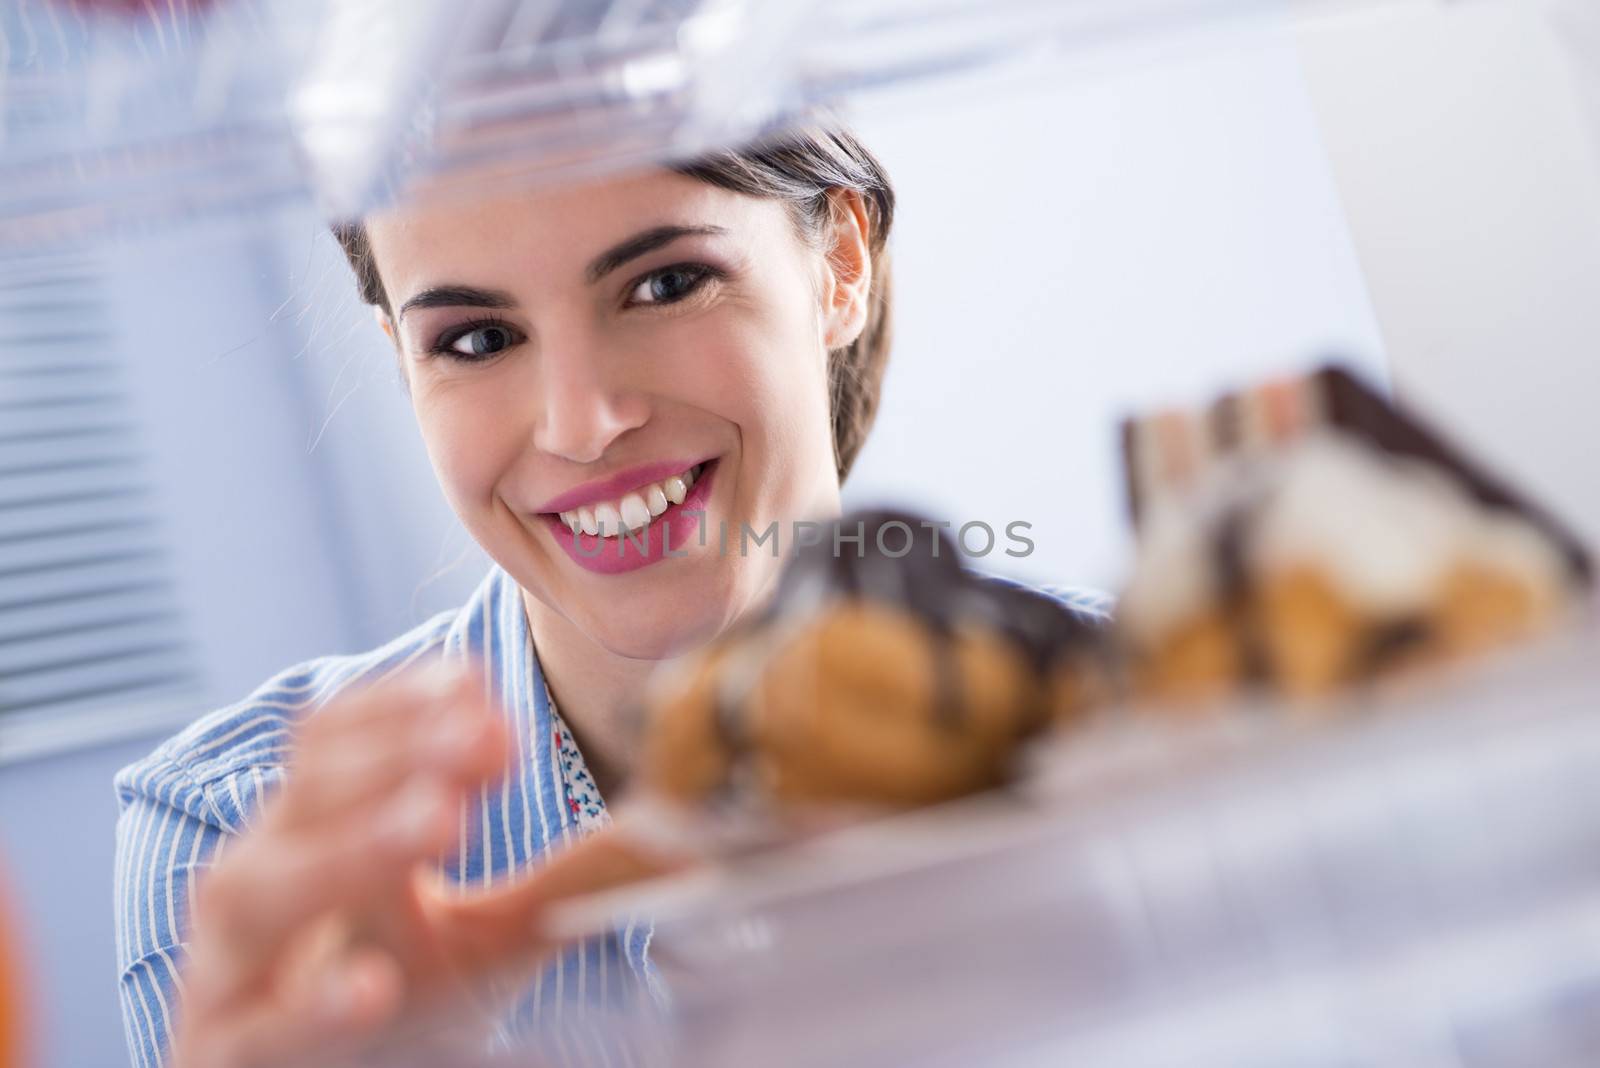 Young woman smiling and taking pastry with chocolate topping from fridge.